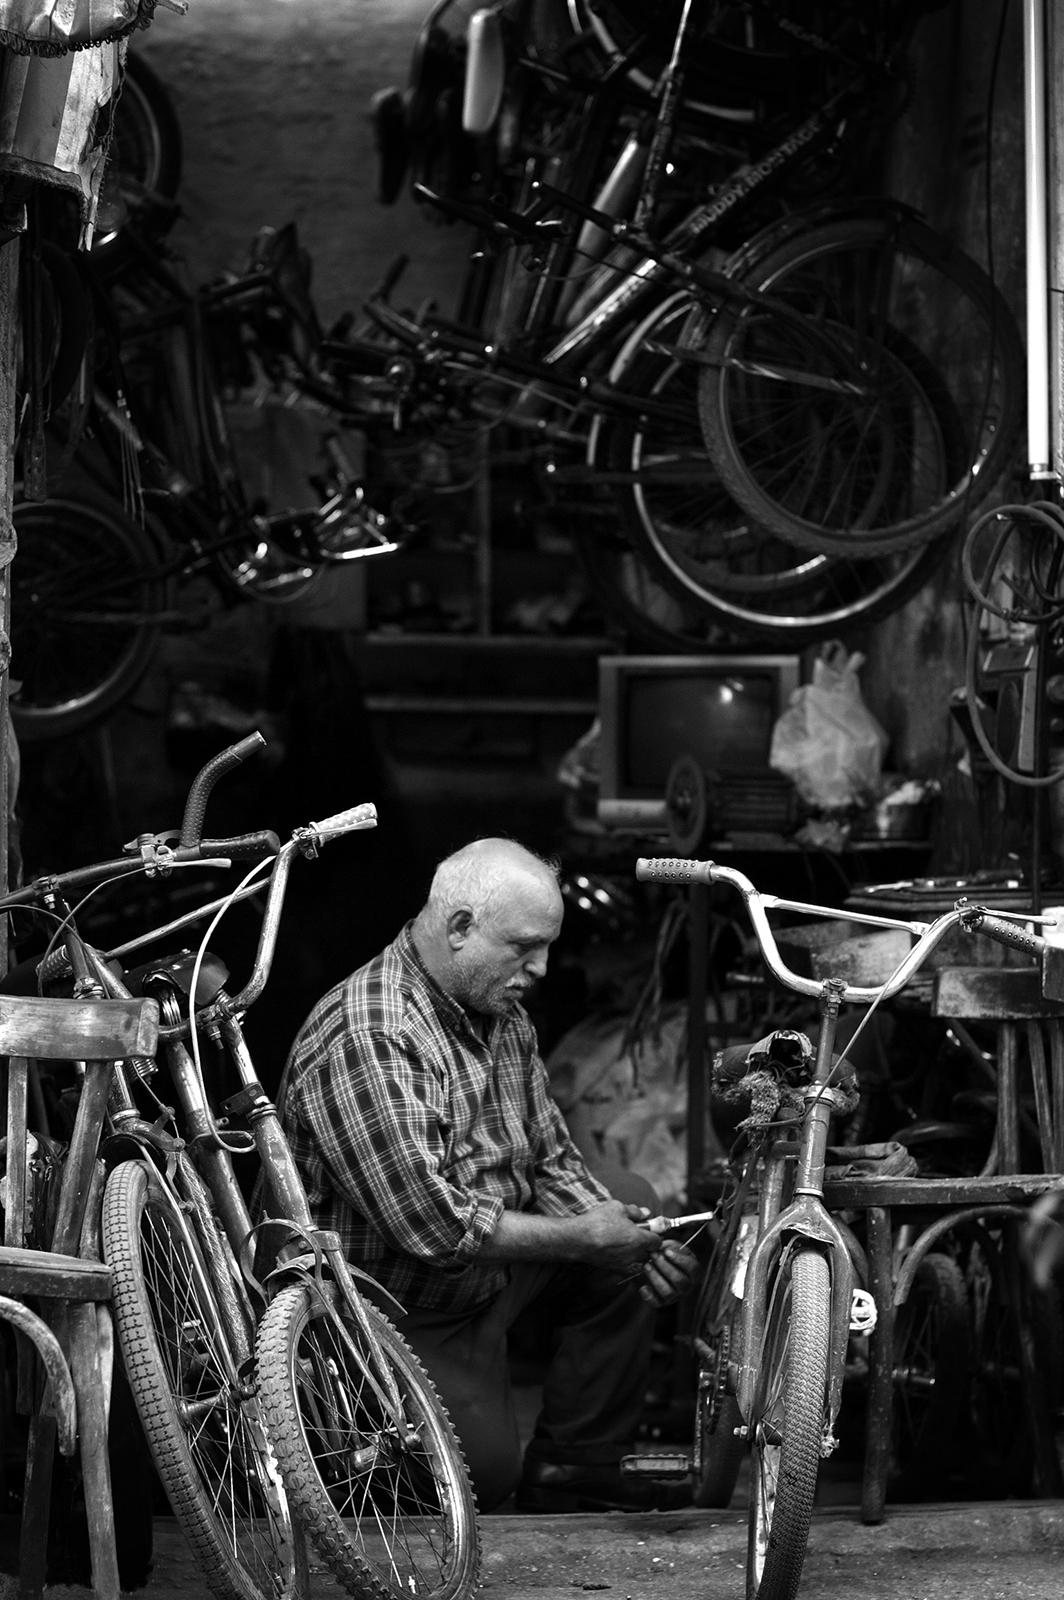 Copts 01 - Signed limited edition archival pigment print, 2012    -  Edition of 10

Bicycle shop in the Coptic Cairo, Egypt, which is a part of Old Cairo which encompasses the Babylon Fortress, the Coptic Museum, the Hanging Church, the Greek Church